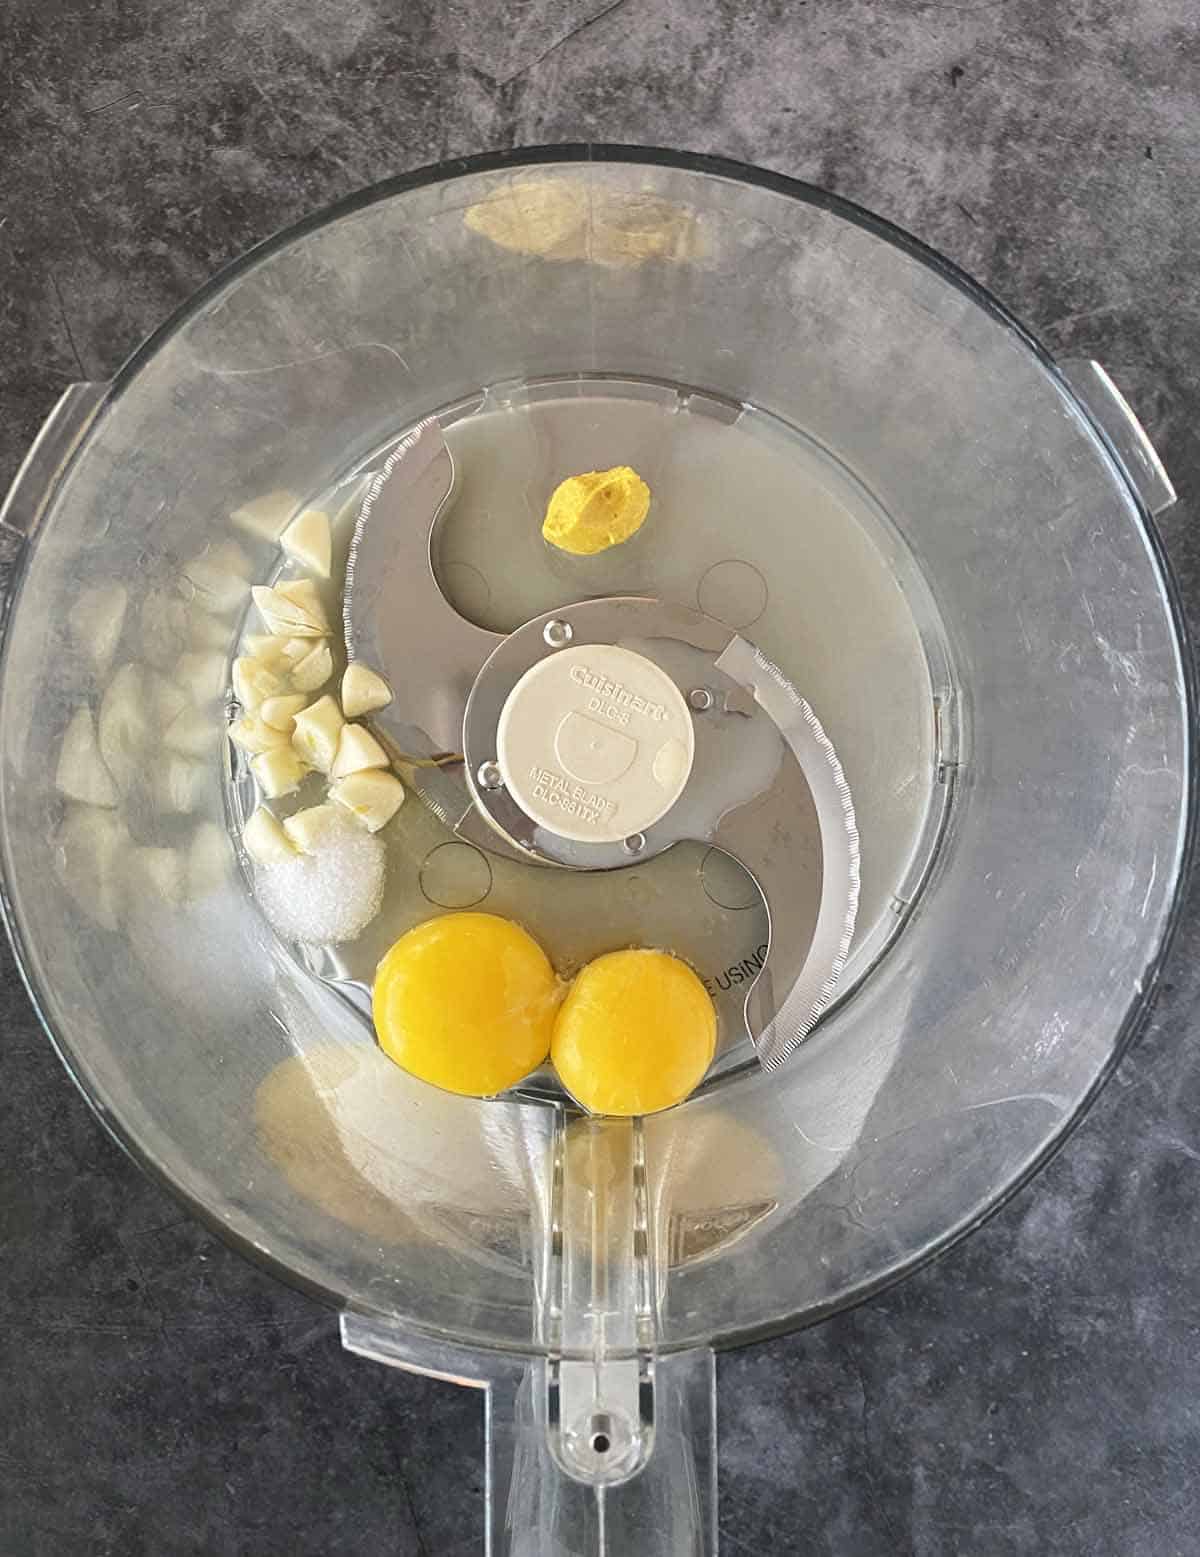 Combining ingredients inside the bowl of a food processor.